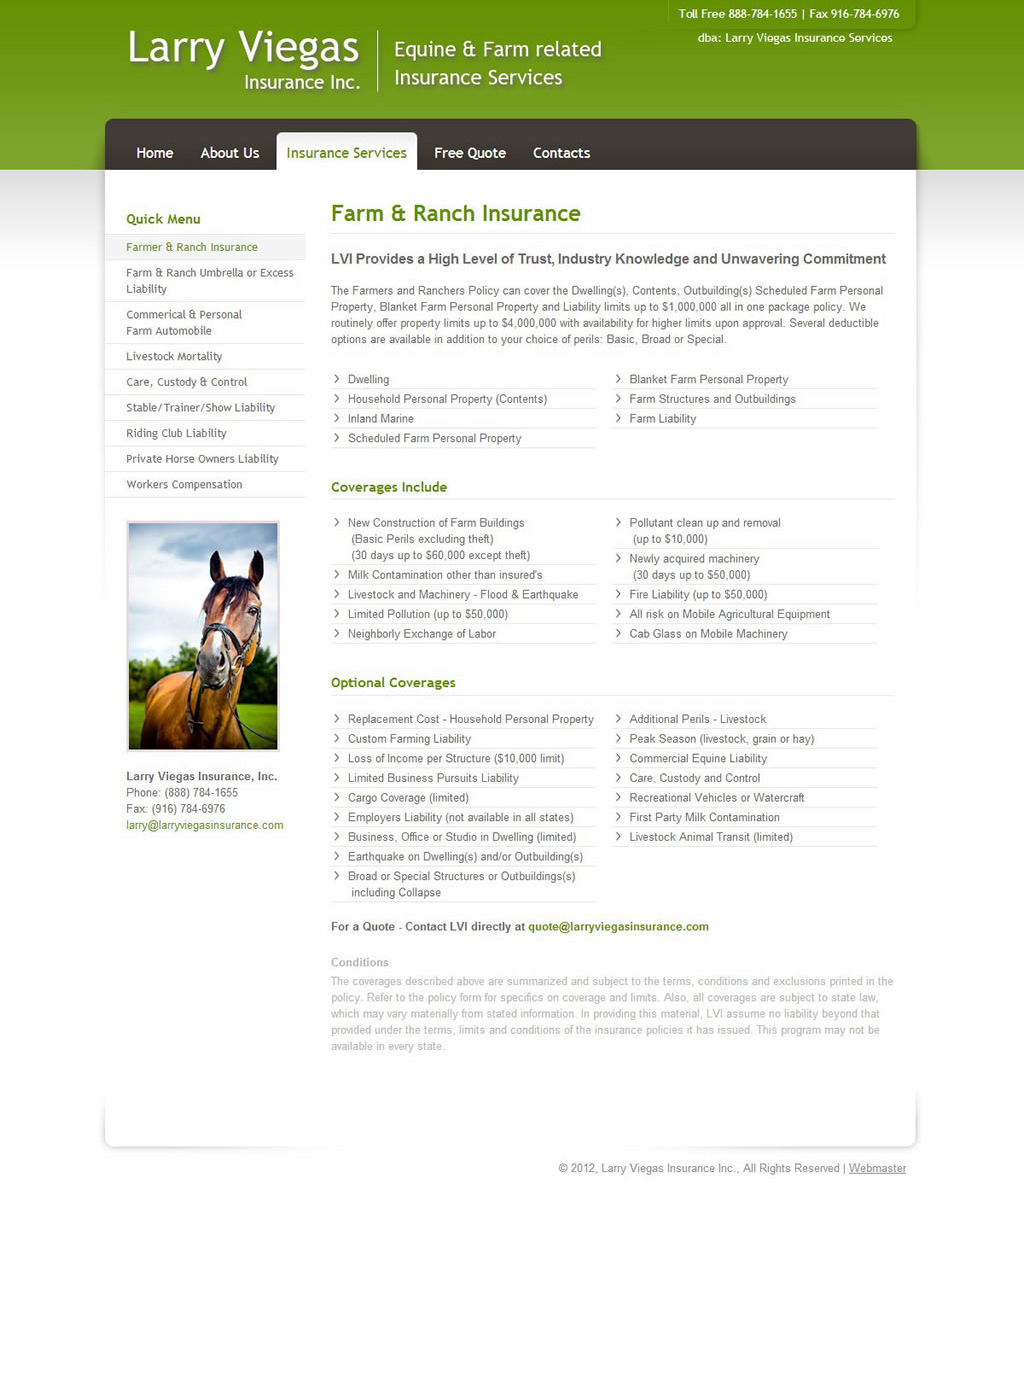 Farm and Ranch Insurance page for Larry Viegas Insurance, Inc.